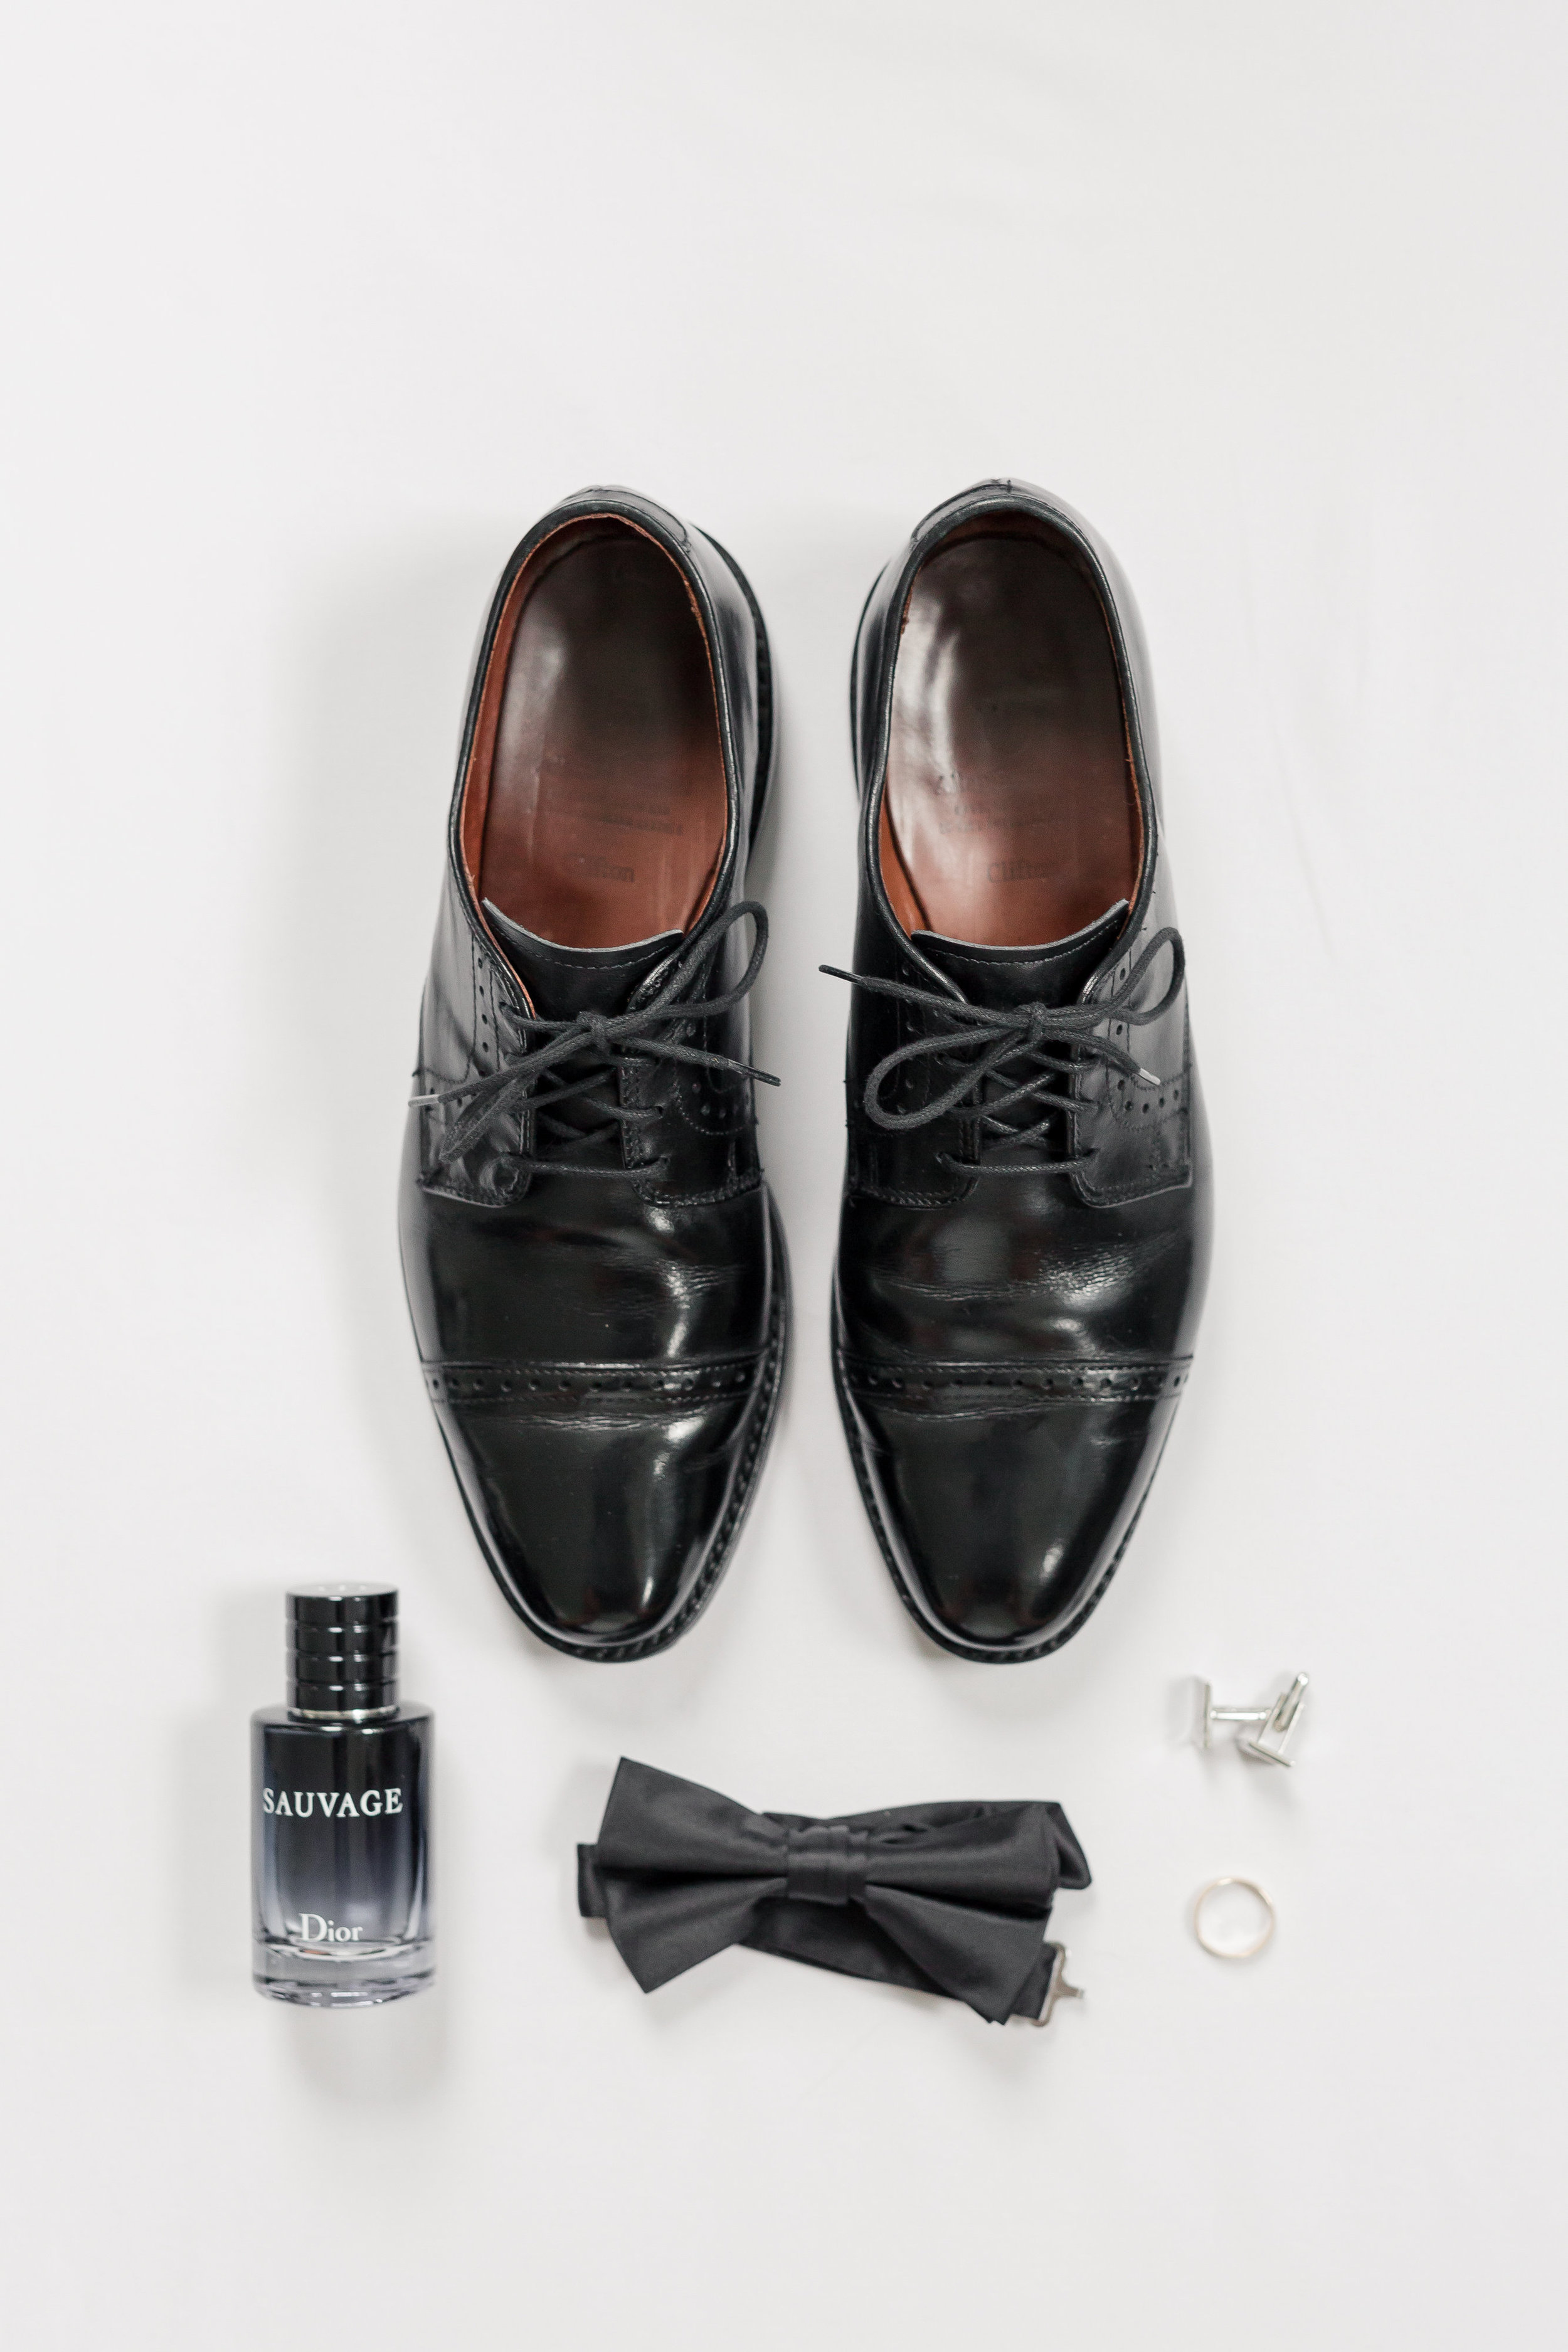 Groom's Accessories - Maison Meredith Photography